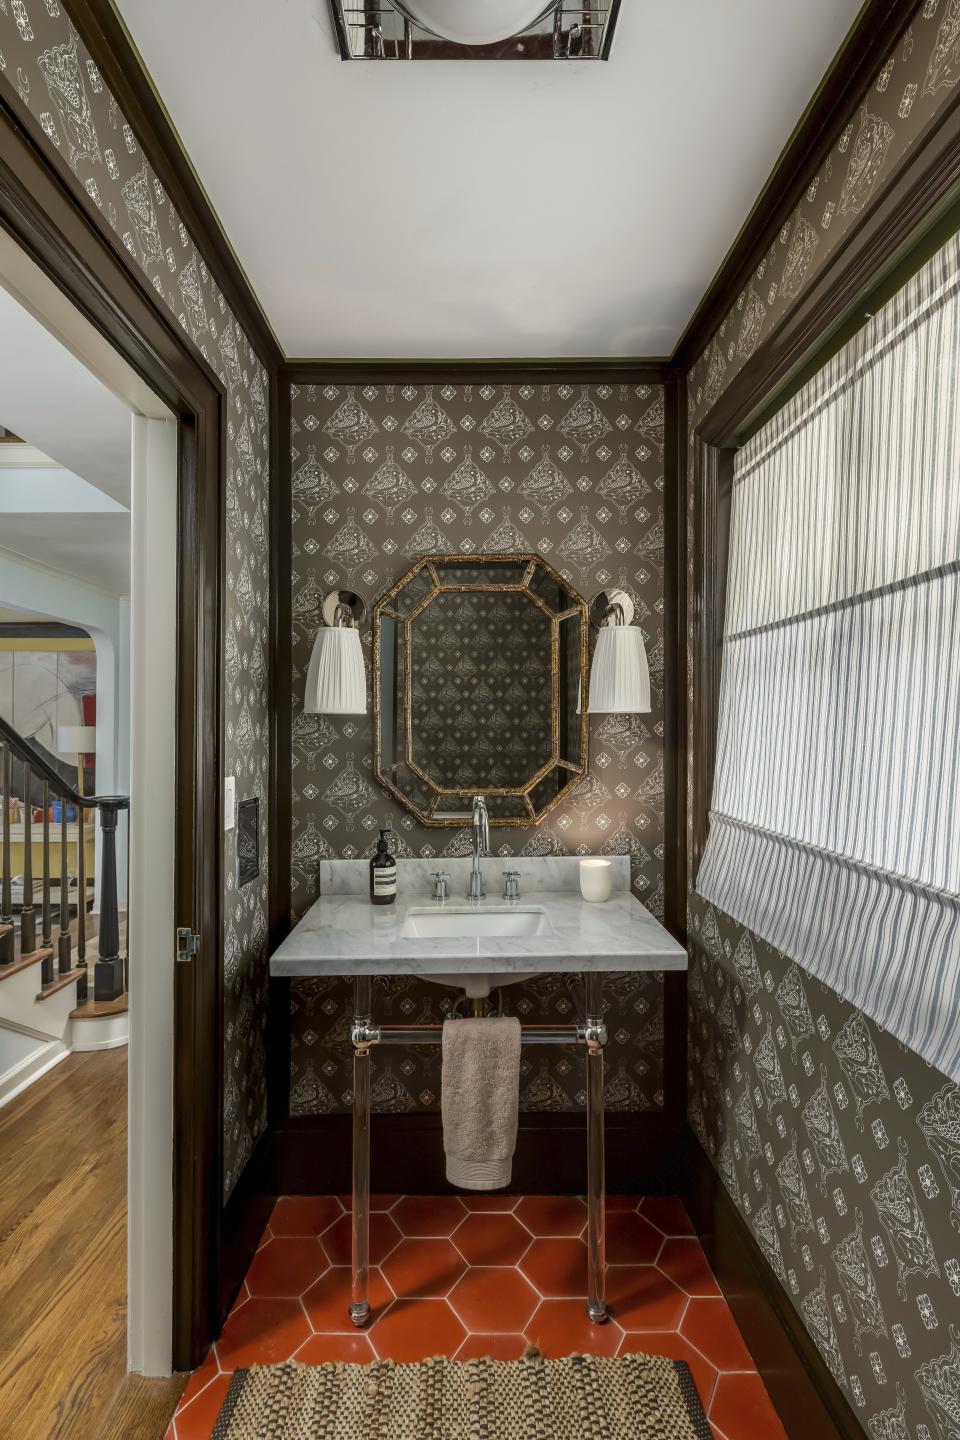 This image provided by Daniel House Club shows a powder room designed by Peter Spalding of Daniel House Club. It features Katie Ridder's Oiseau wallpaper, Hex's barn-hued tile, Behr's Espresso Beans paint, contemporary lighting and a sleek marble sink. Spalding says "slow decorating" includes buying the most authentic versions of furniture that you can afford. (Kelly Kish Photography via AP)